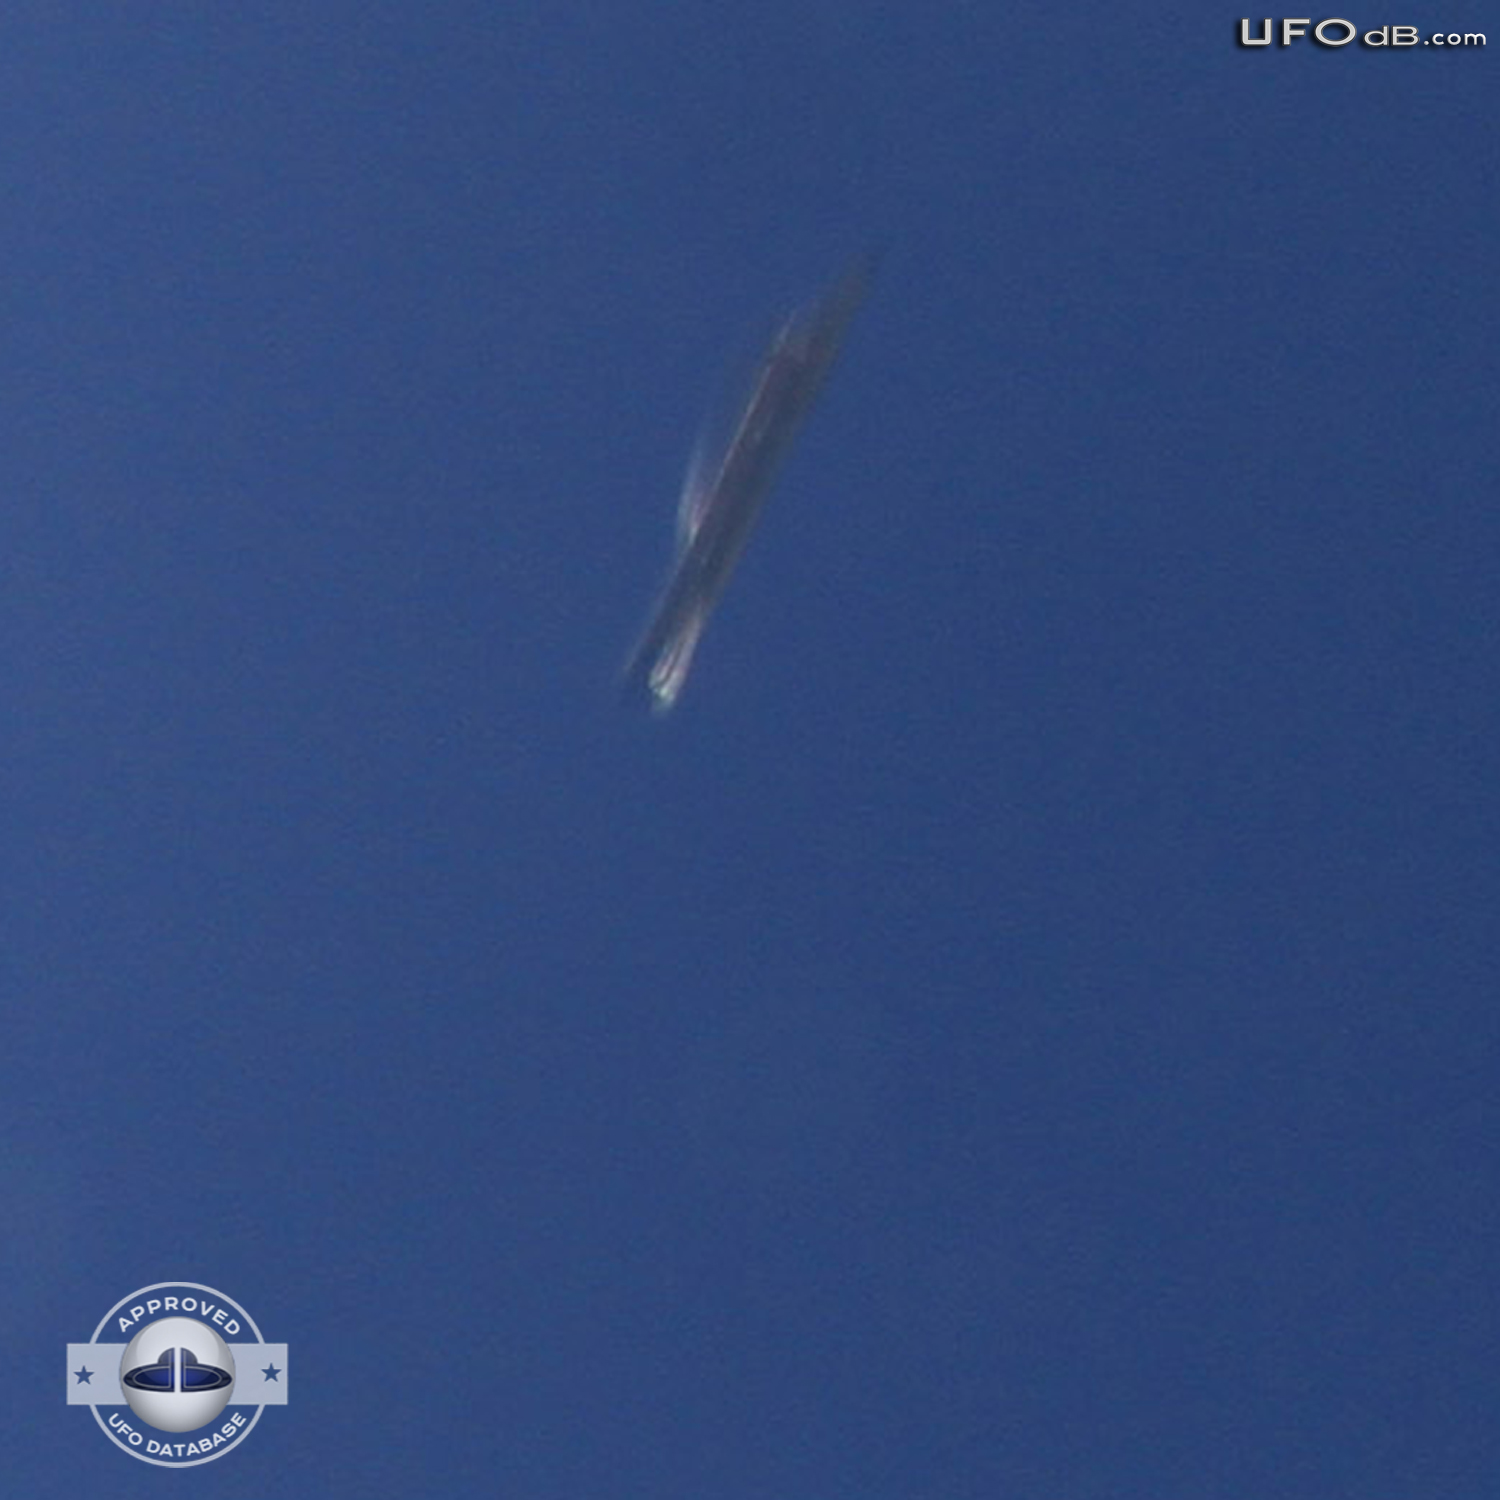 Incredibly Fast UFO caught on picture in Michigan, USA | May 24 2011 UFO Picture #326-3